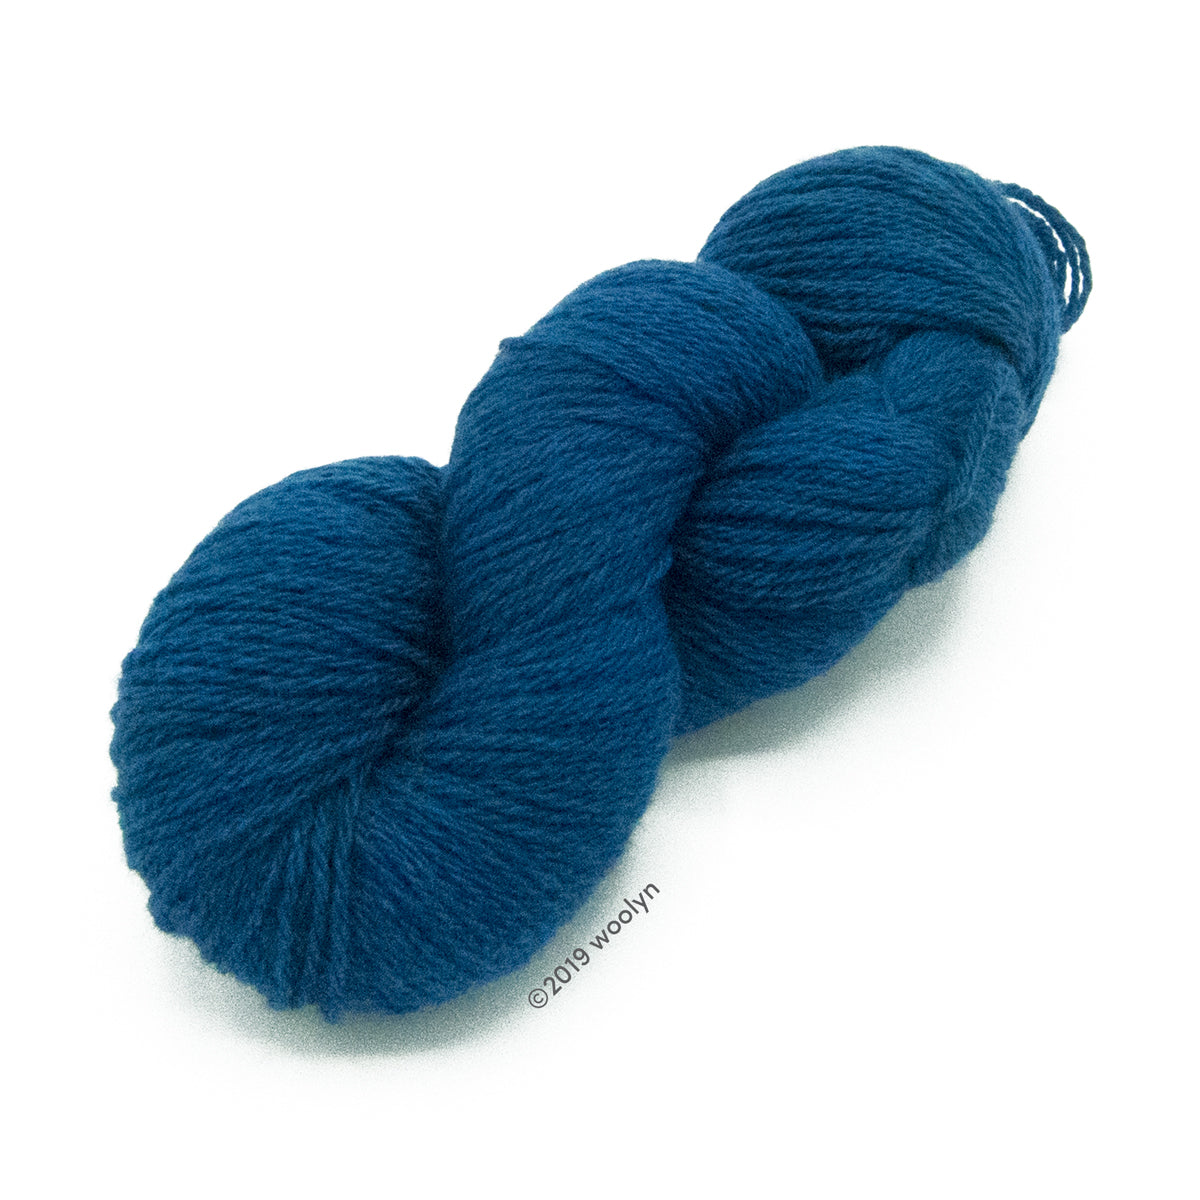 North Light Fibers Spring St in Butterfly Pea, a bright blue color.